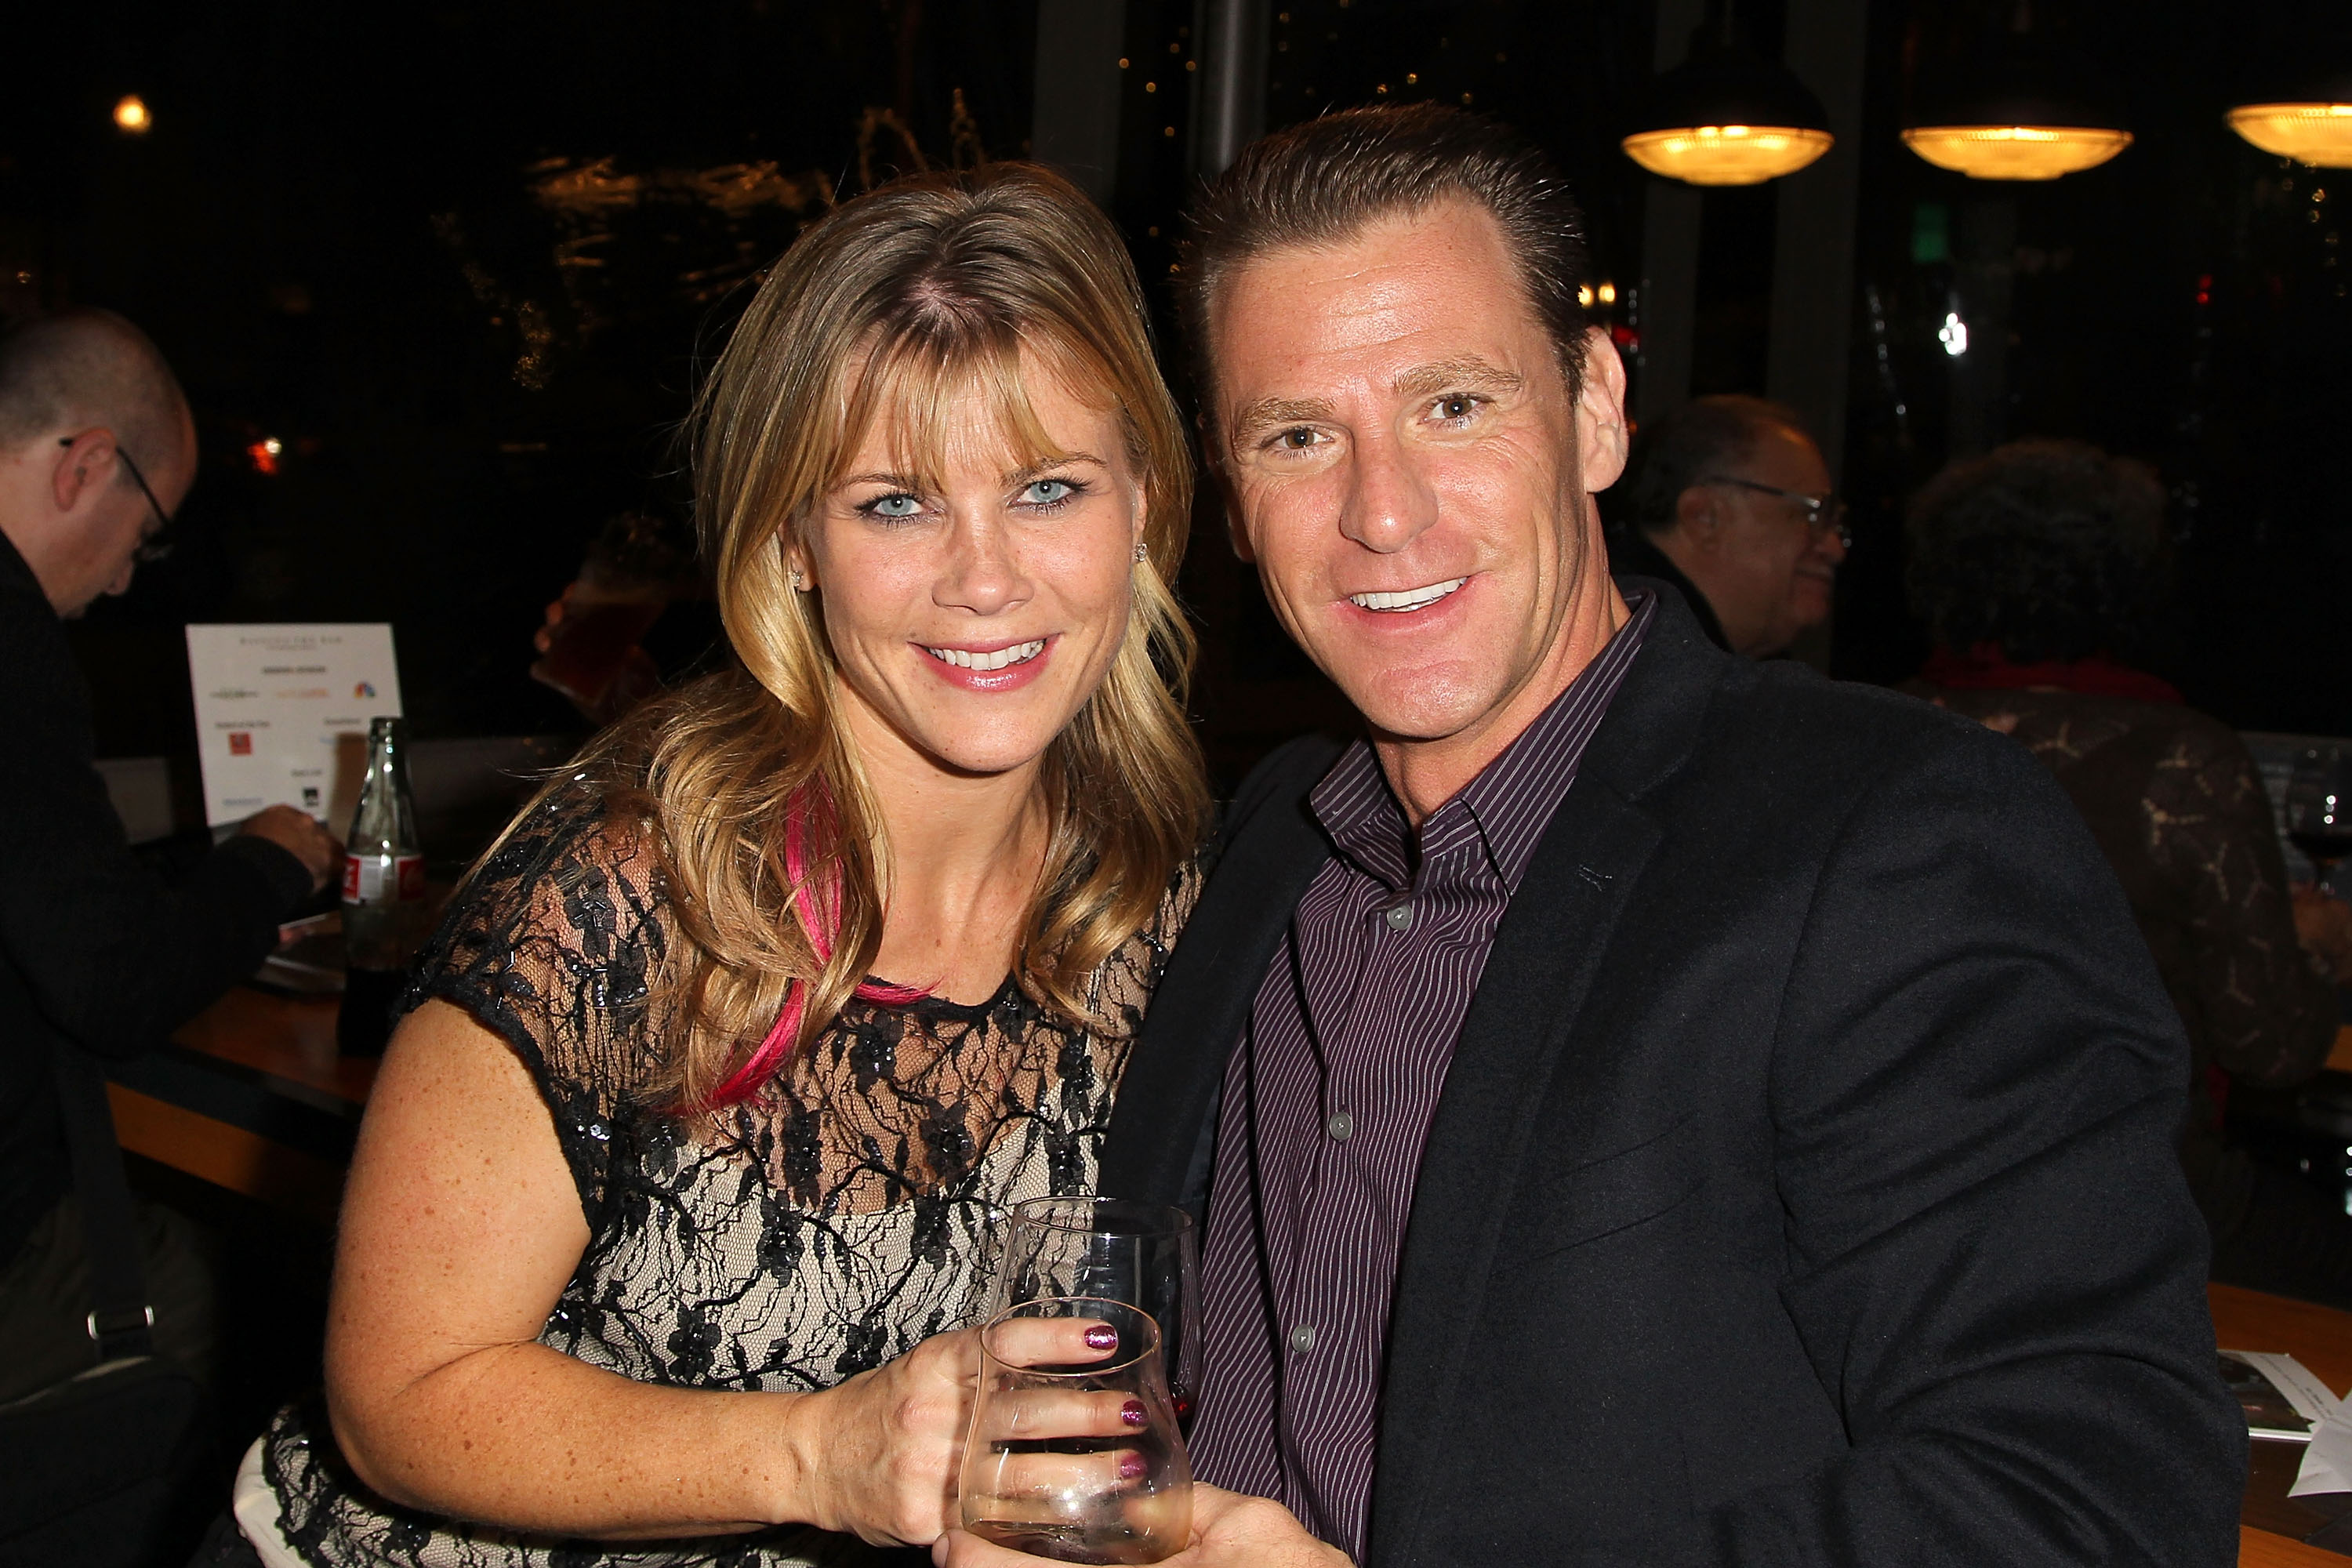 Alison Sweeney and David Sanov at the "Raising The Bar To End Parkinson's" event on December 5, 2012, in Culver City, California | Source: Getty Images